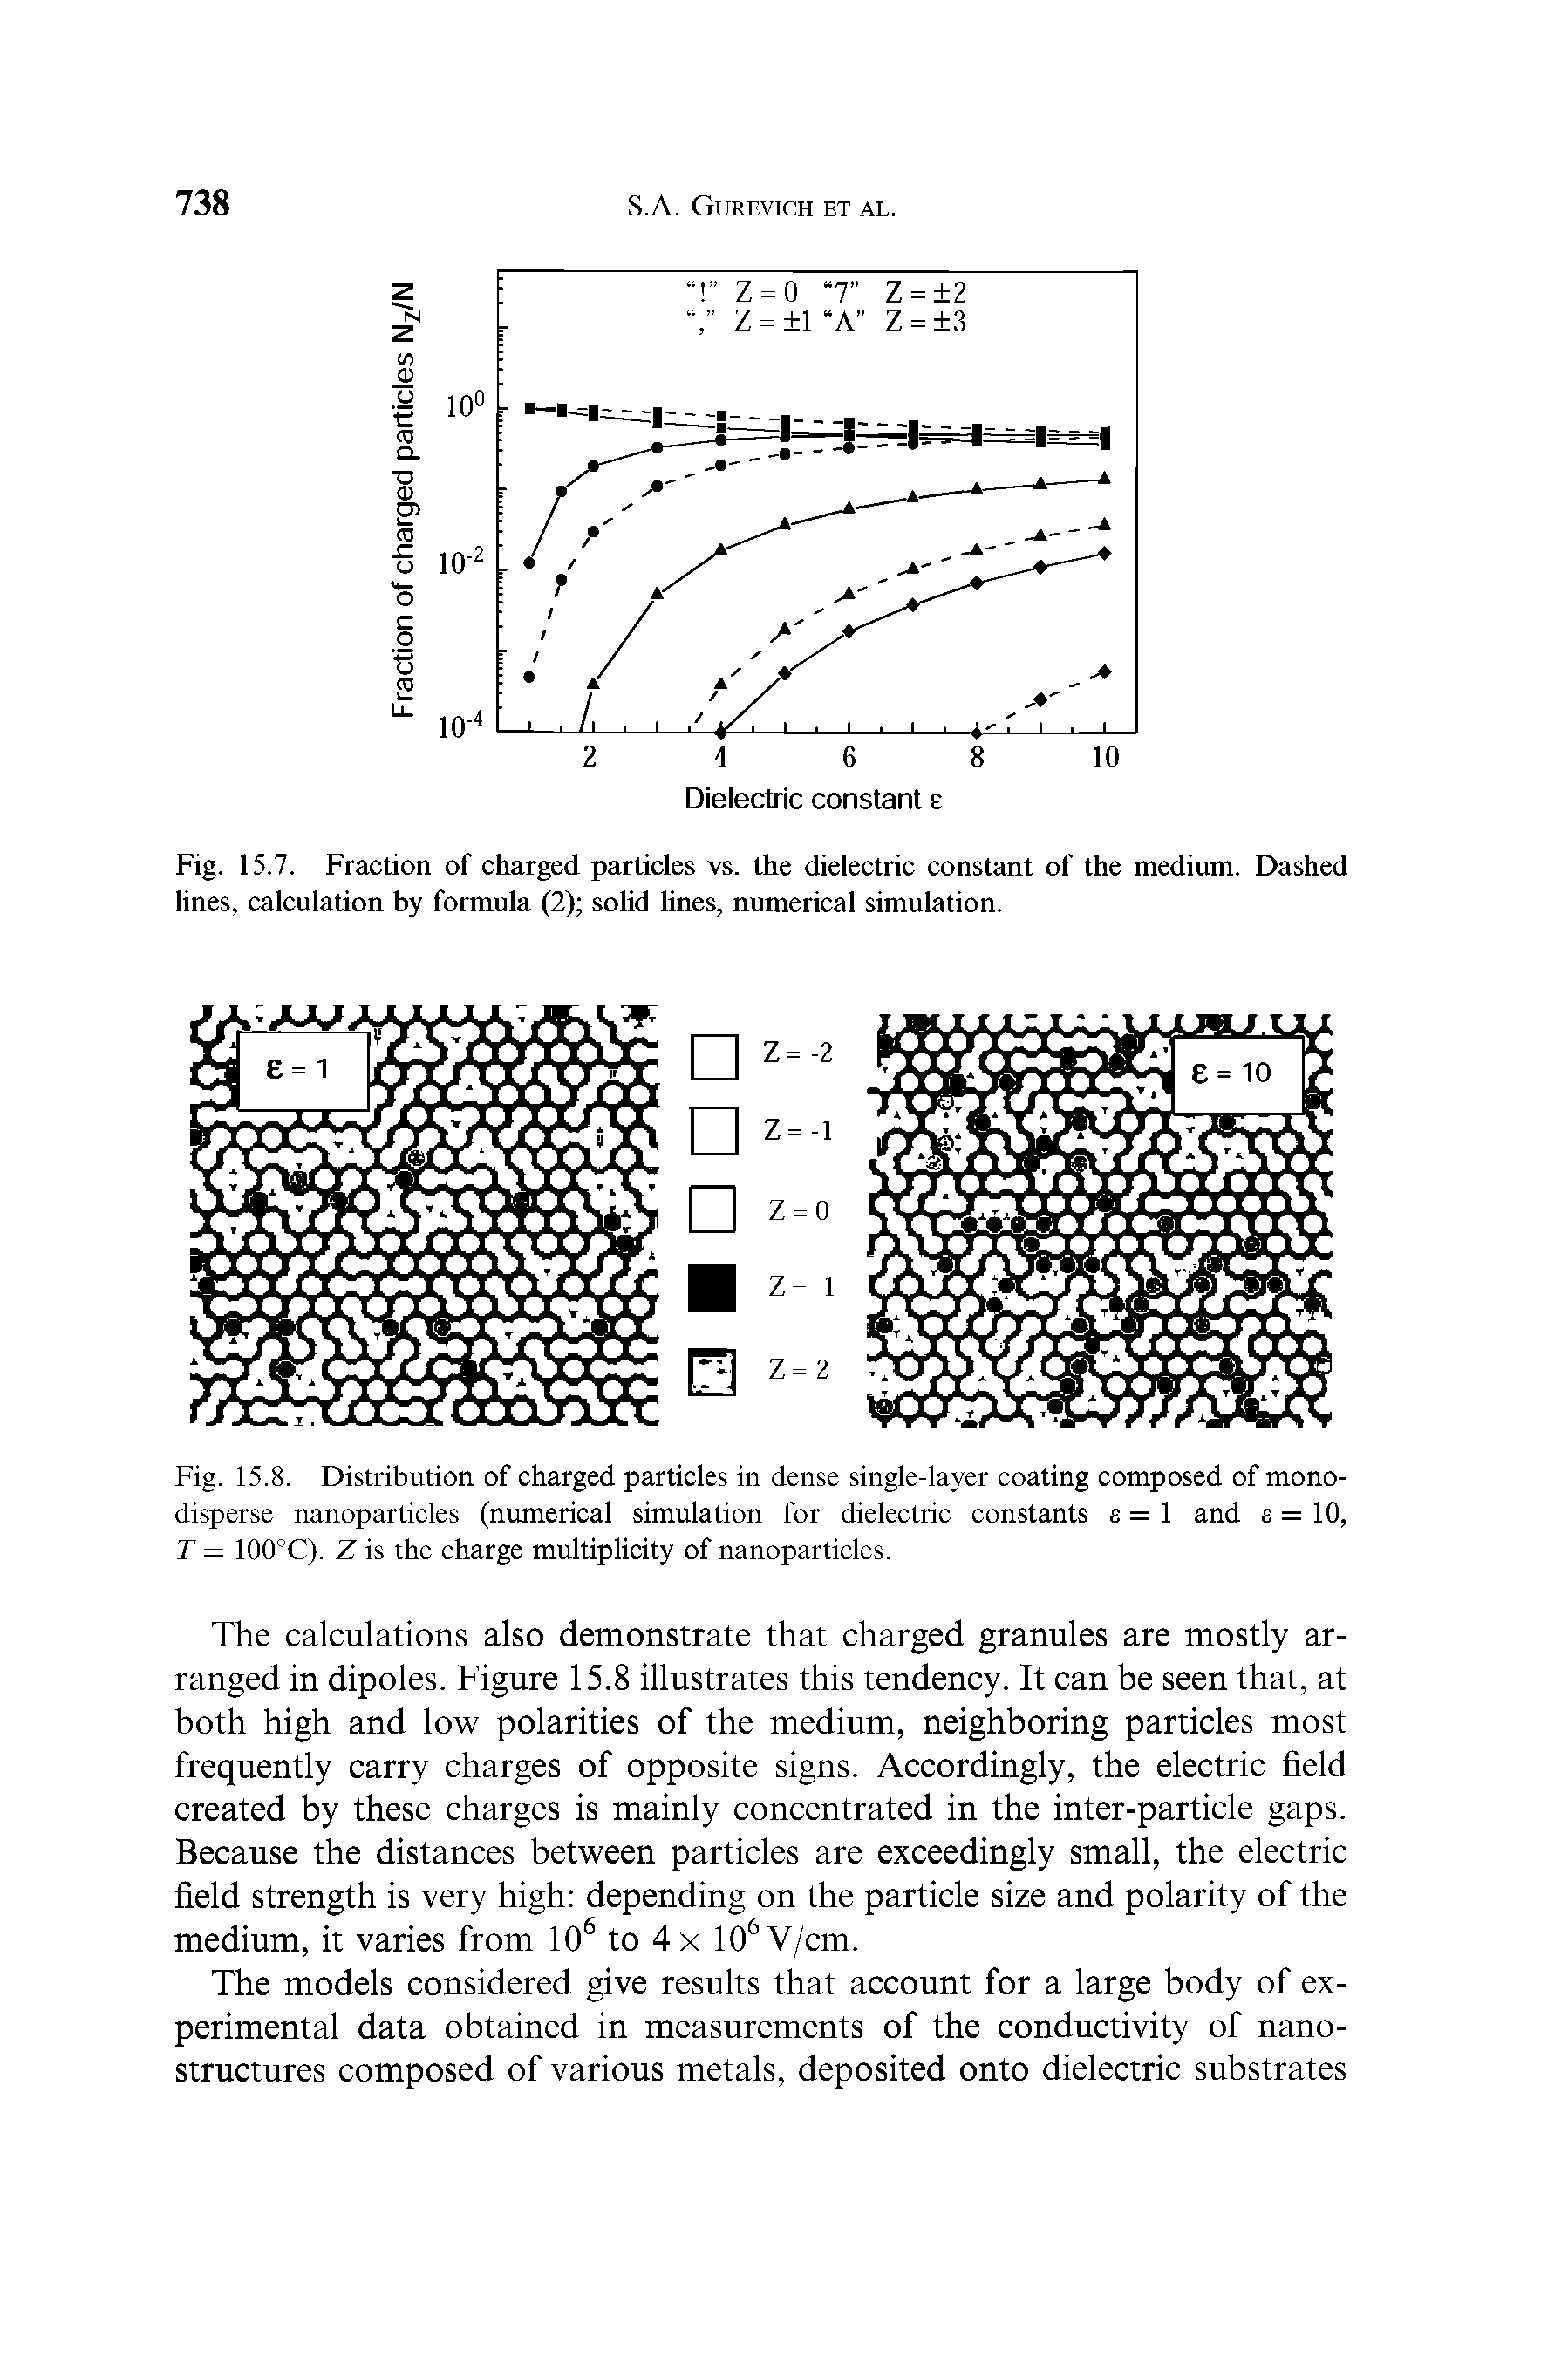 Fig. 15.8. Distribution of charged particles in dense single-layer coating composed of mono-disperse nanoparticles (numerical simulation for dielectric constants e = 1 and e = 10, T = 100°C). Z is the charge multiplicity of nanoparticles.